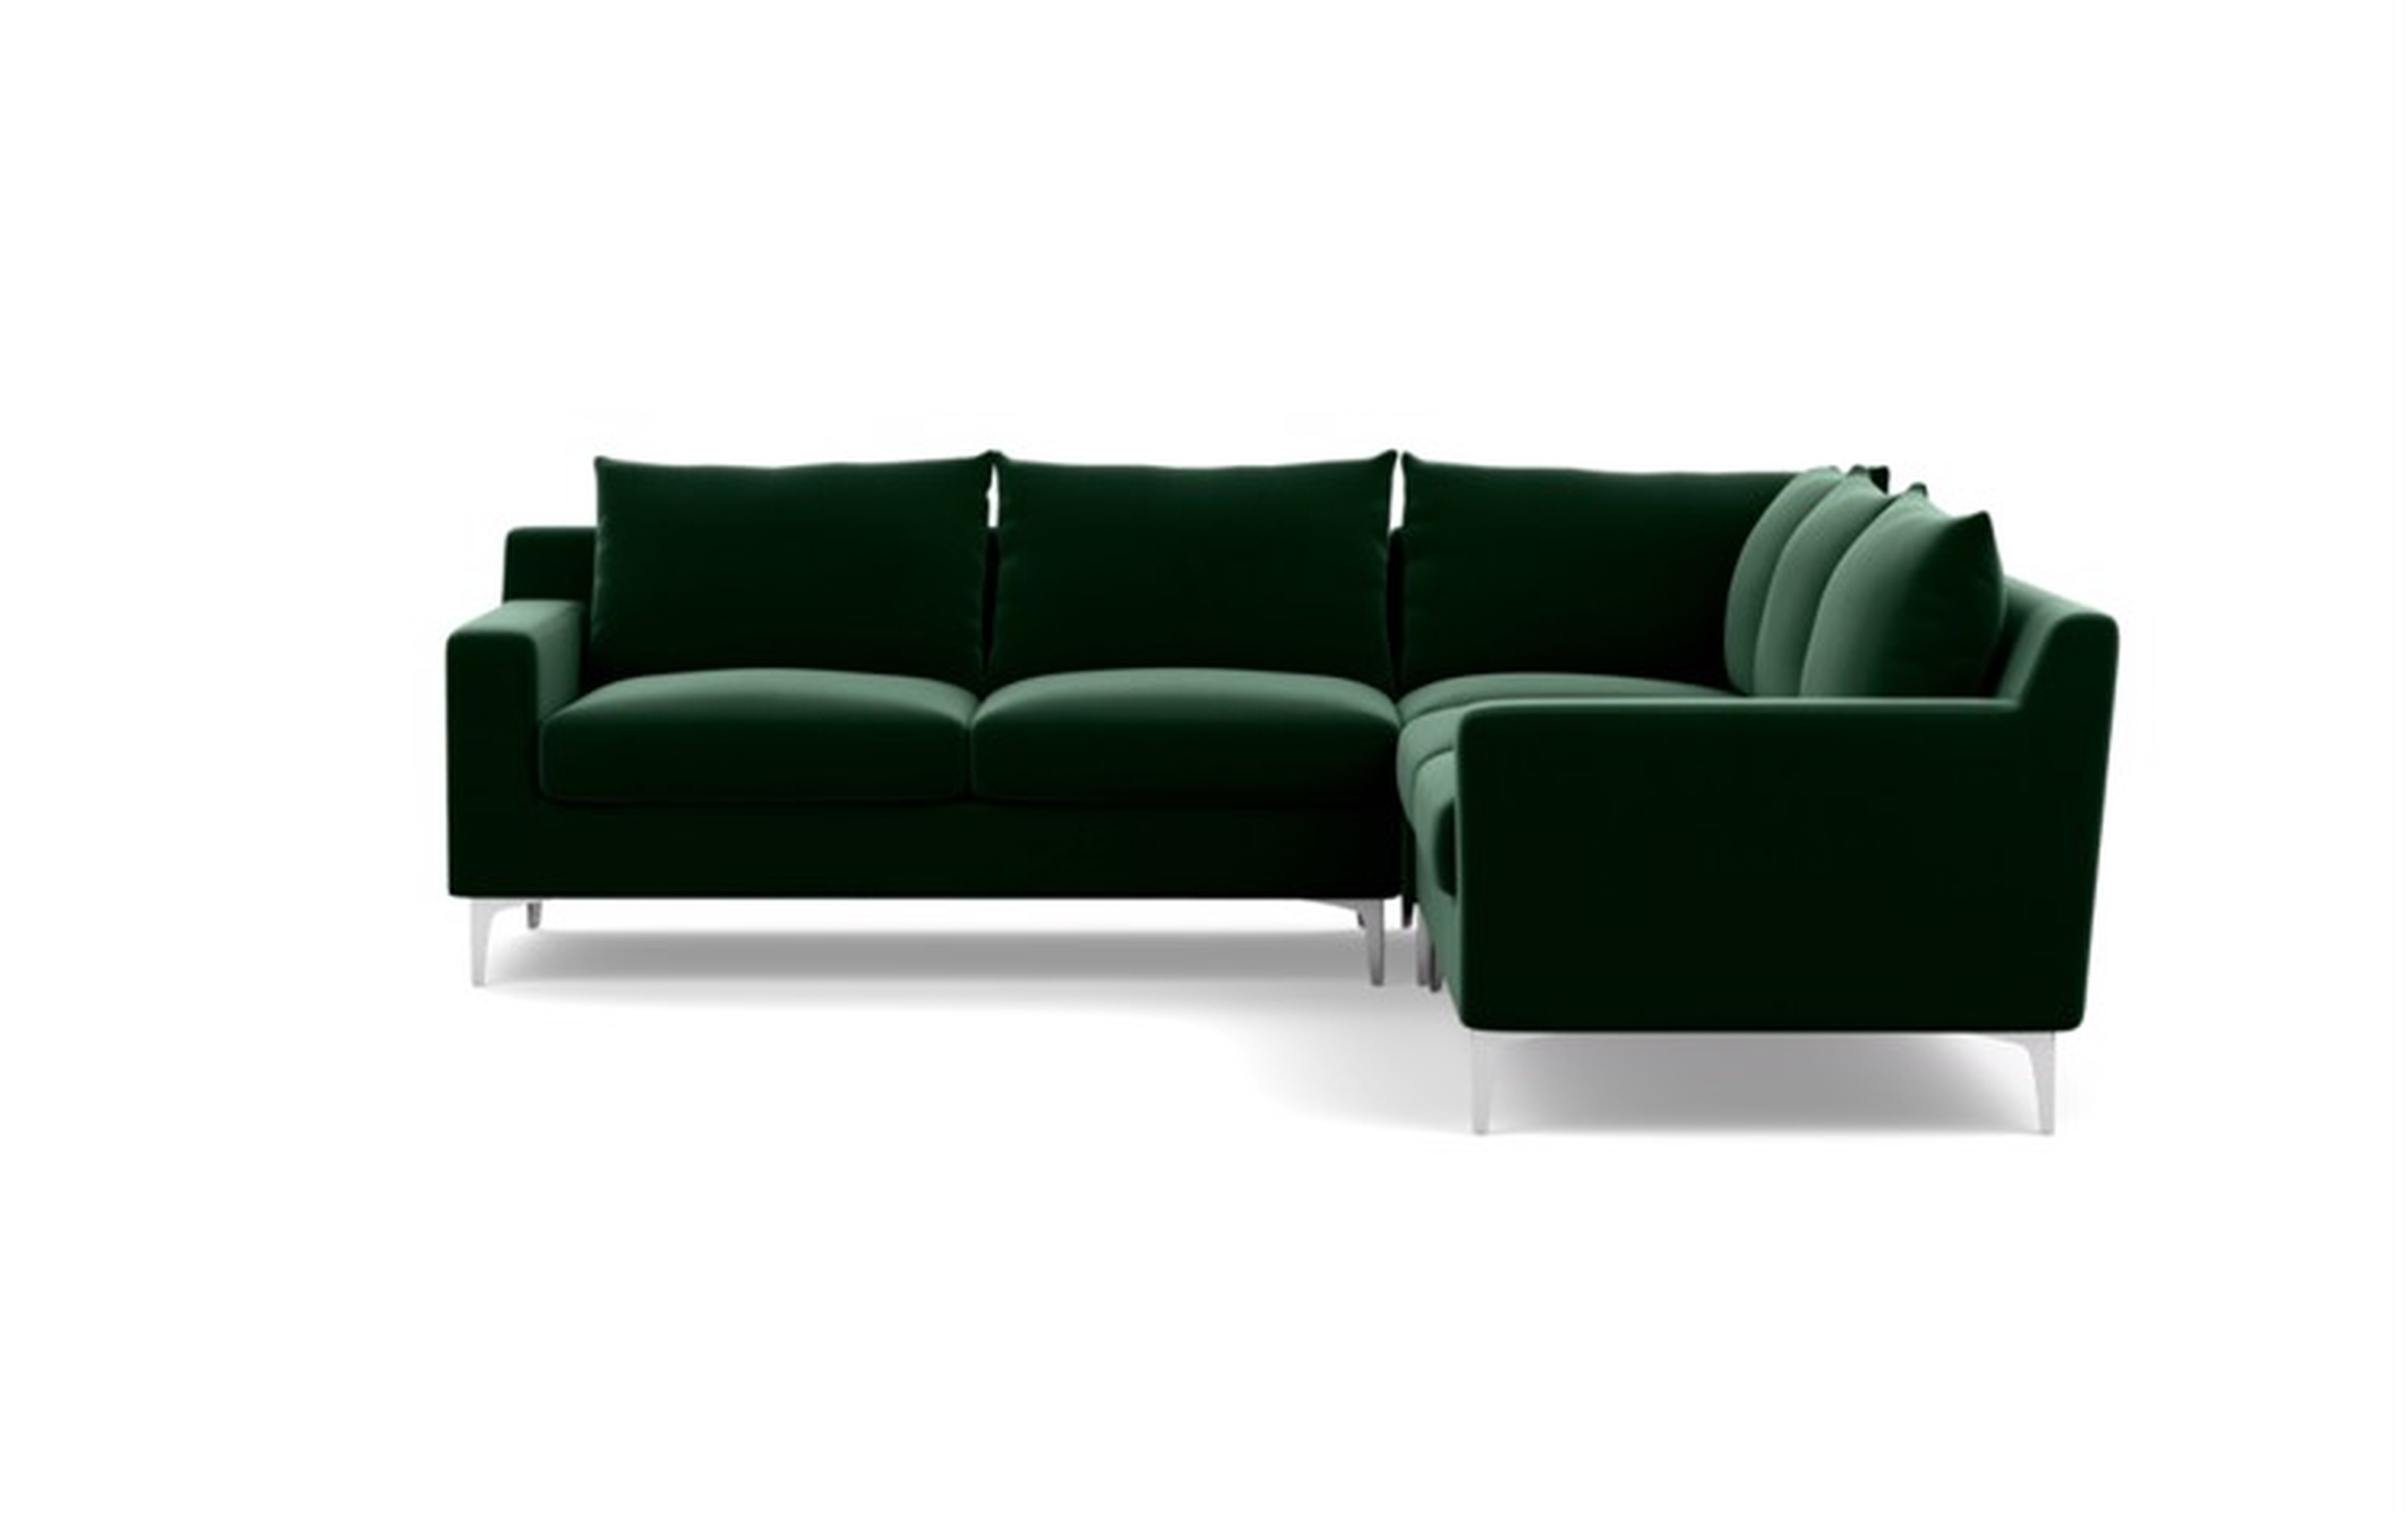 Sloan Sectionals with Corner Sectionals in Emerald Fabric with natural oak legs - Interior Define